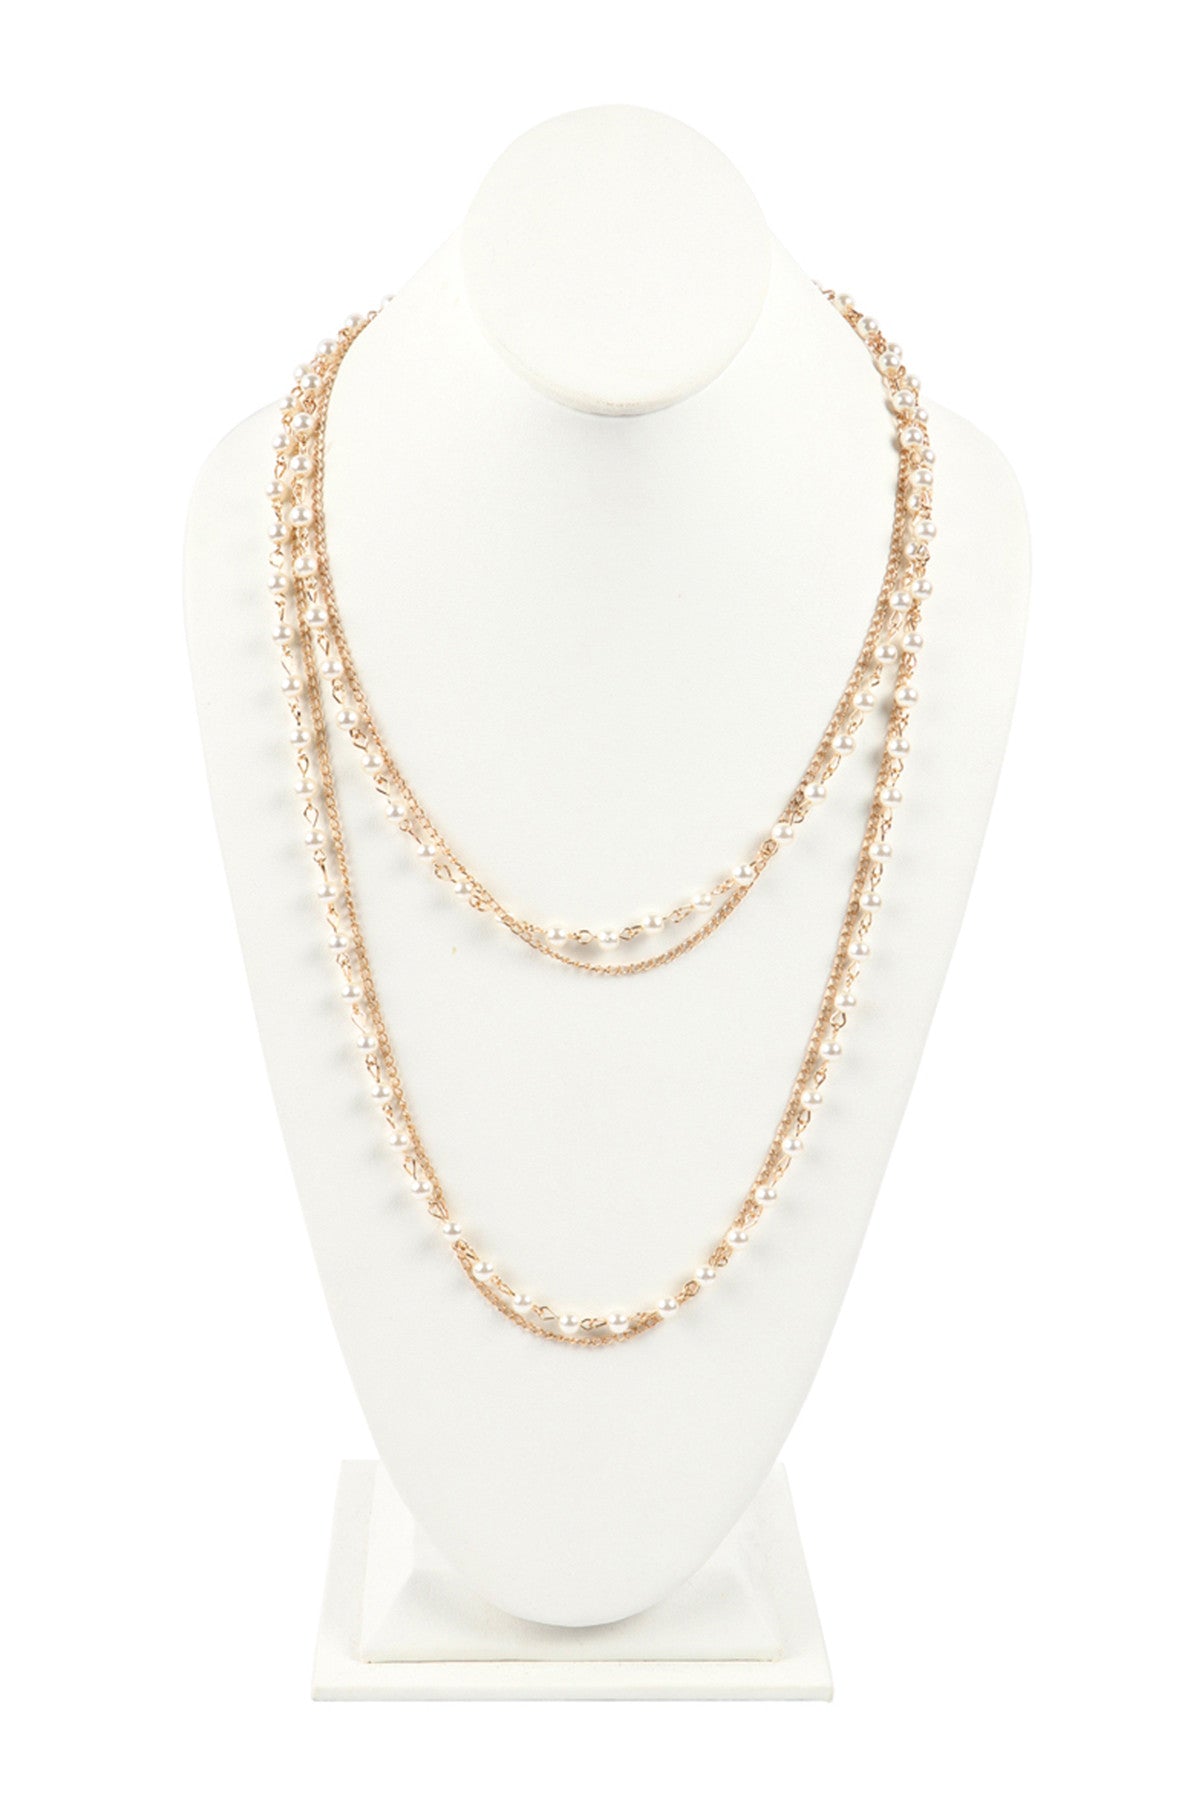 MULTI LAYER PEARL CONVERTIBLEMASKS CHAIN OR NECKLACE BAG CHAIN